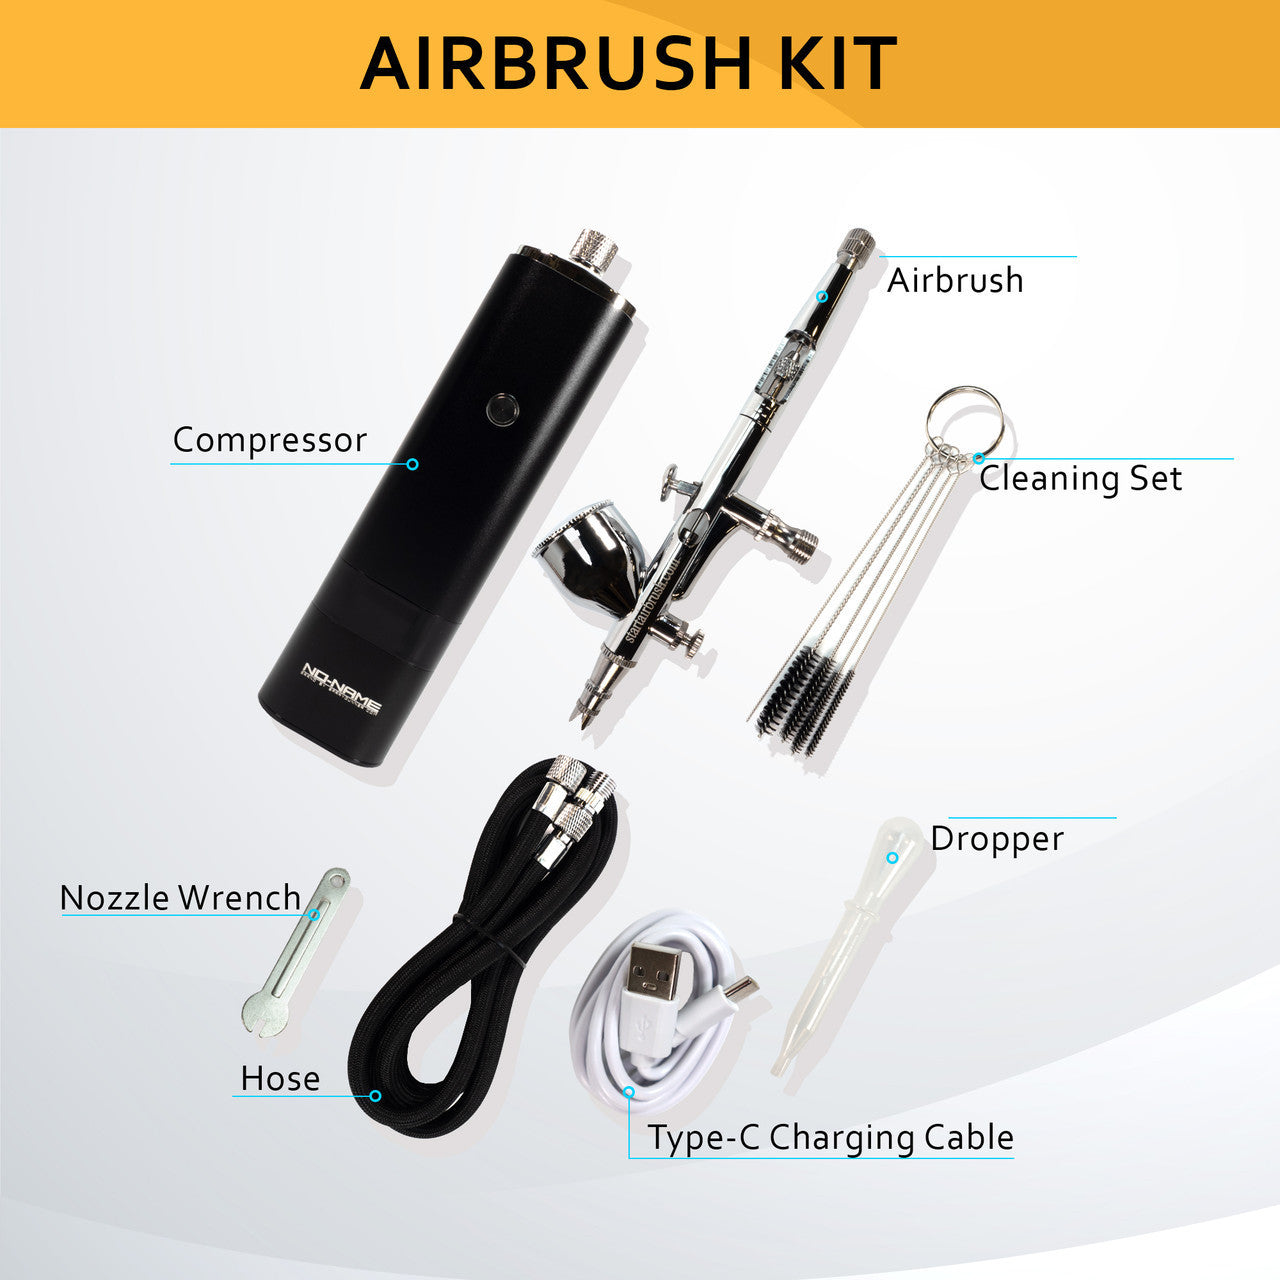 Cordless Airbrush Kit with Compressor, Rechargeable Battery & Acrylic Airbrush Paints by NO-NAME Brand  NN-CA20-180-NNP NO-NAME brand